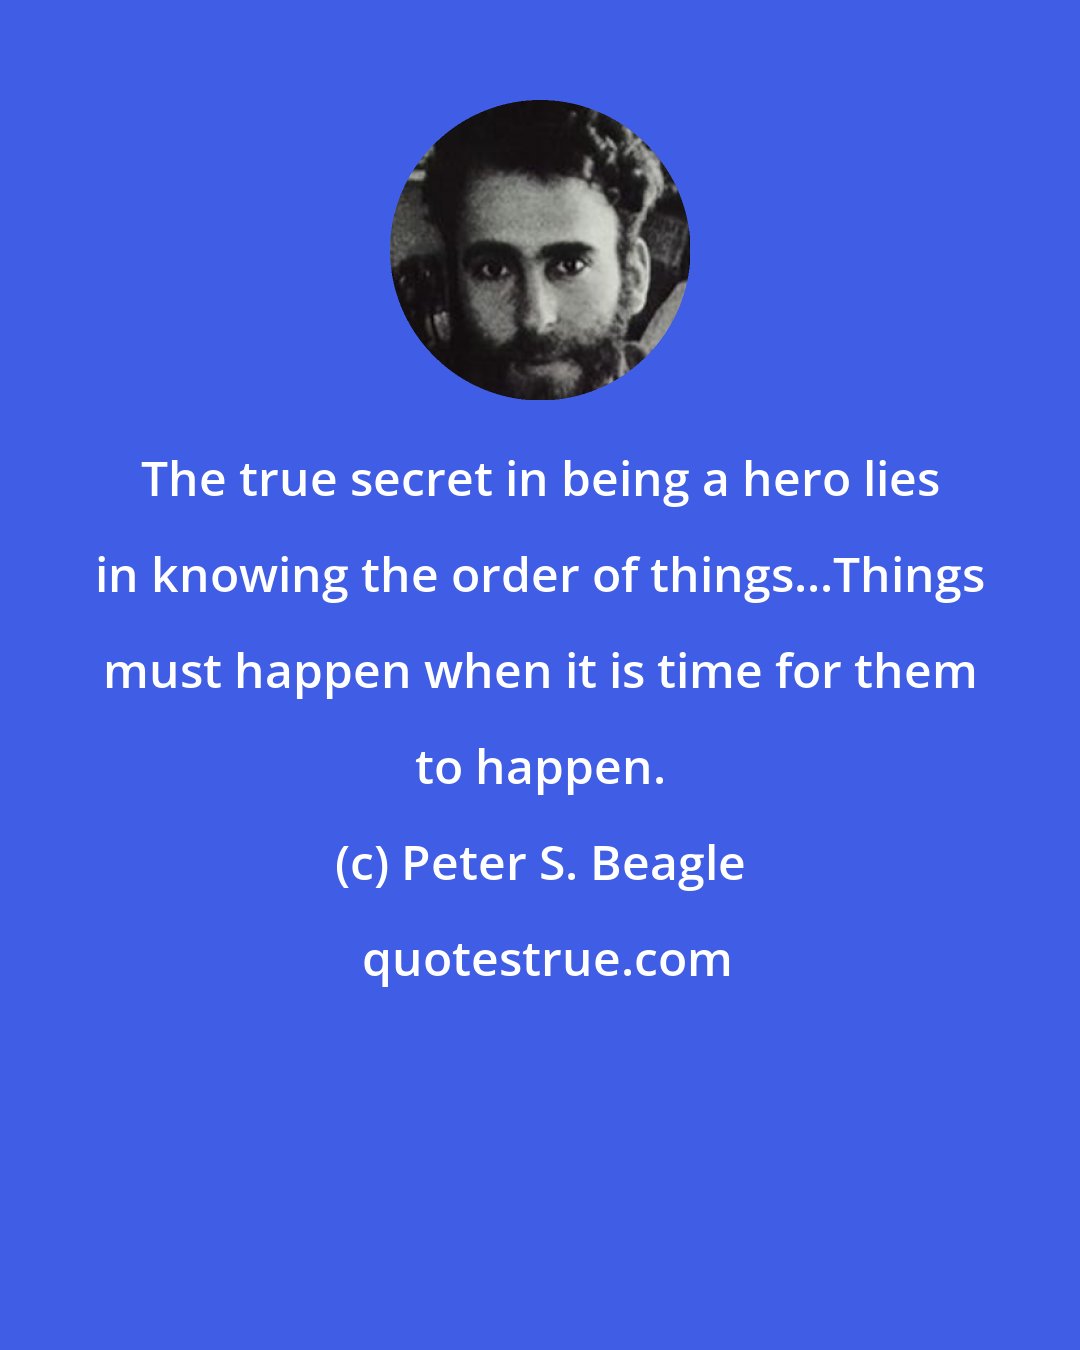 Peter S. Beagle: The true secret in being a hero lies in knowing the order of things...Things must happen when it is time for them to happen.